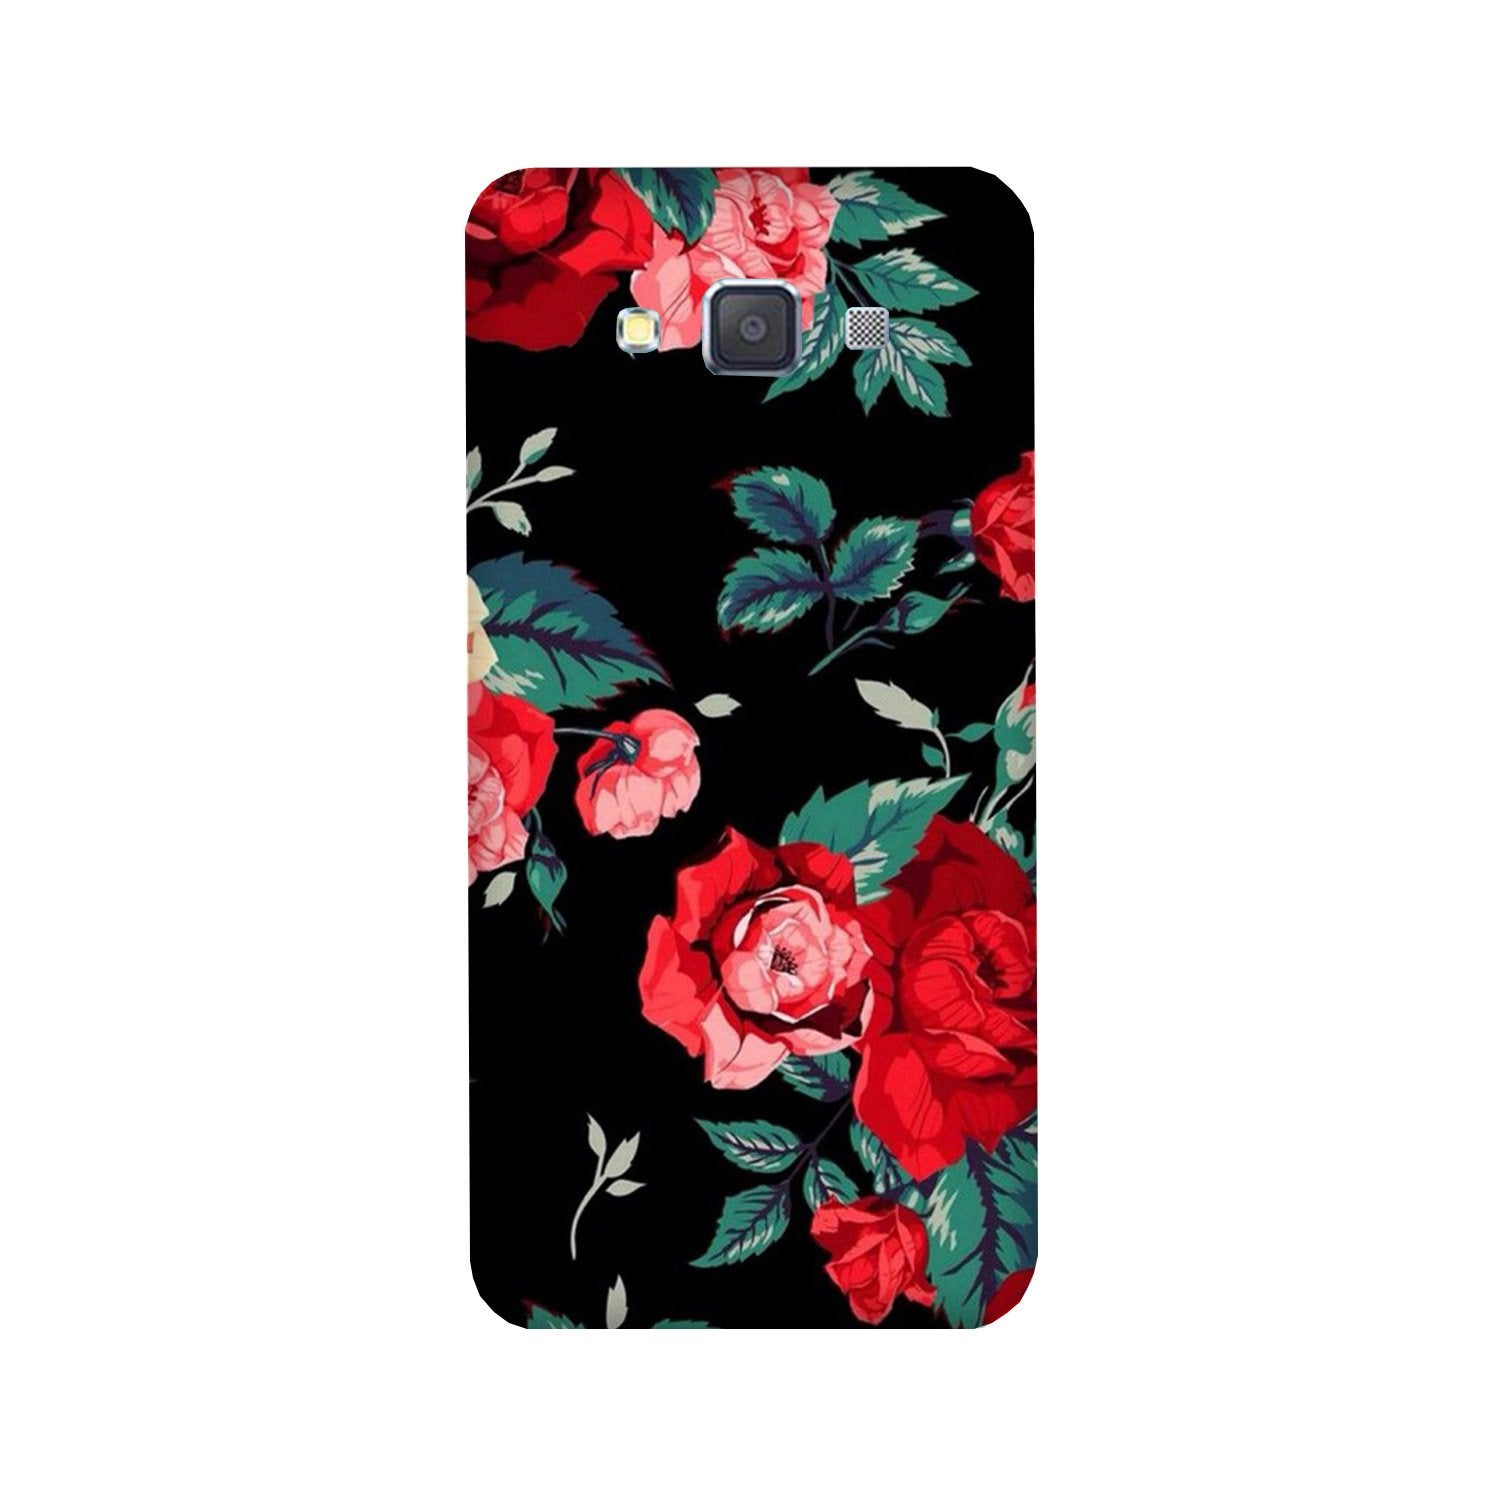 Red Rose2 Case for Galaxy ON5/ON5 Pro